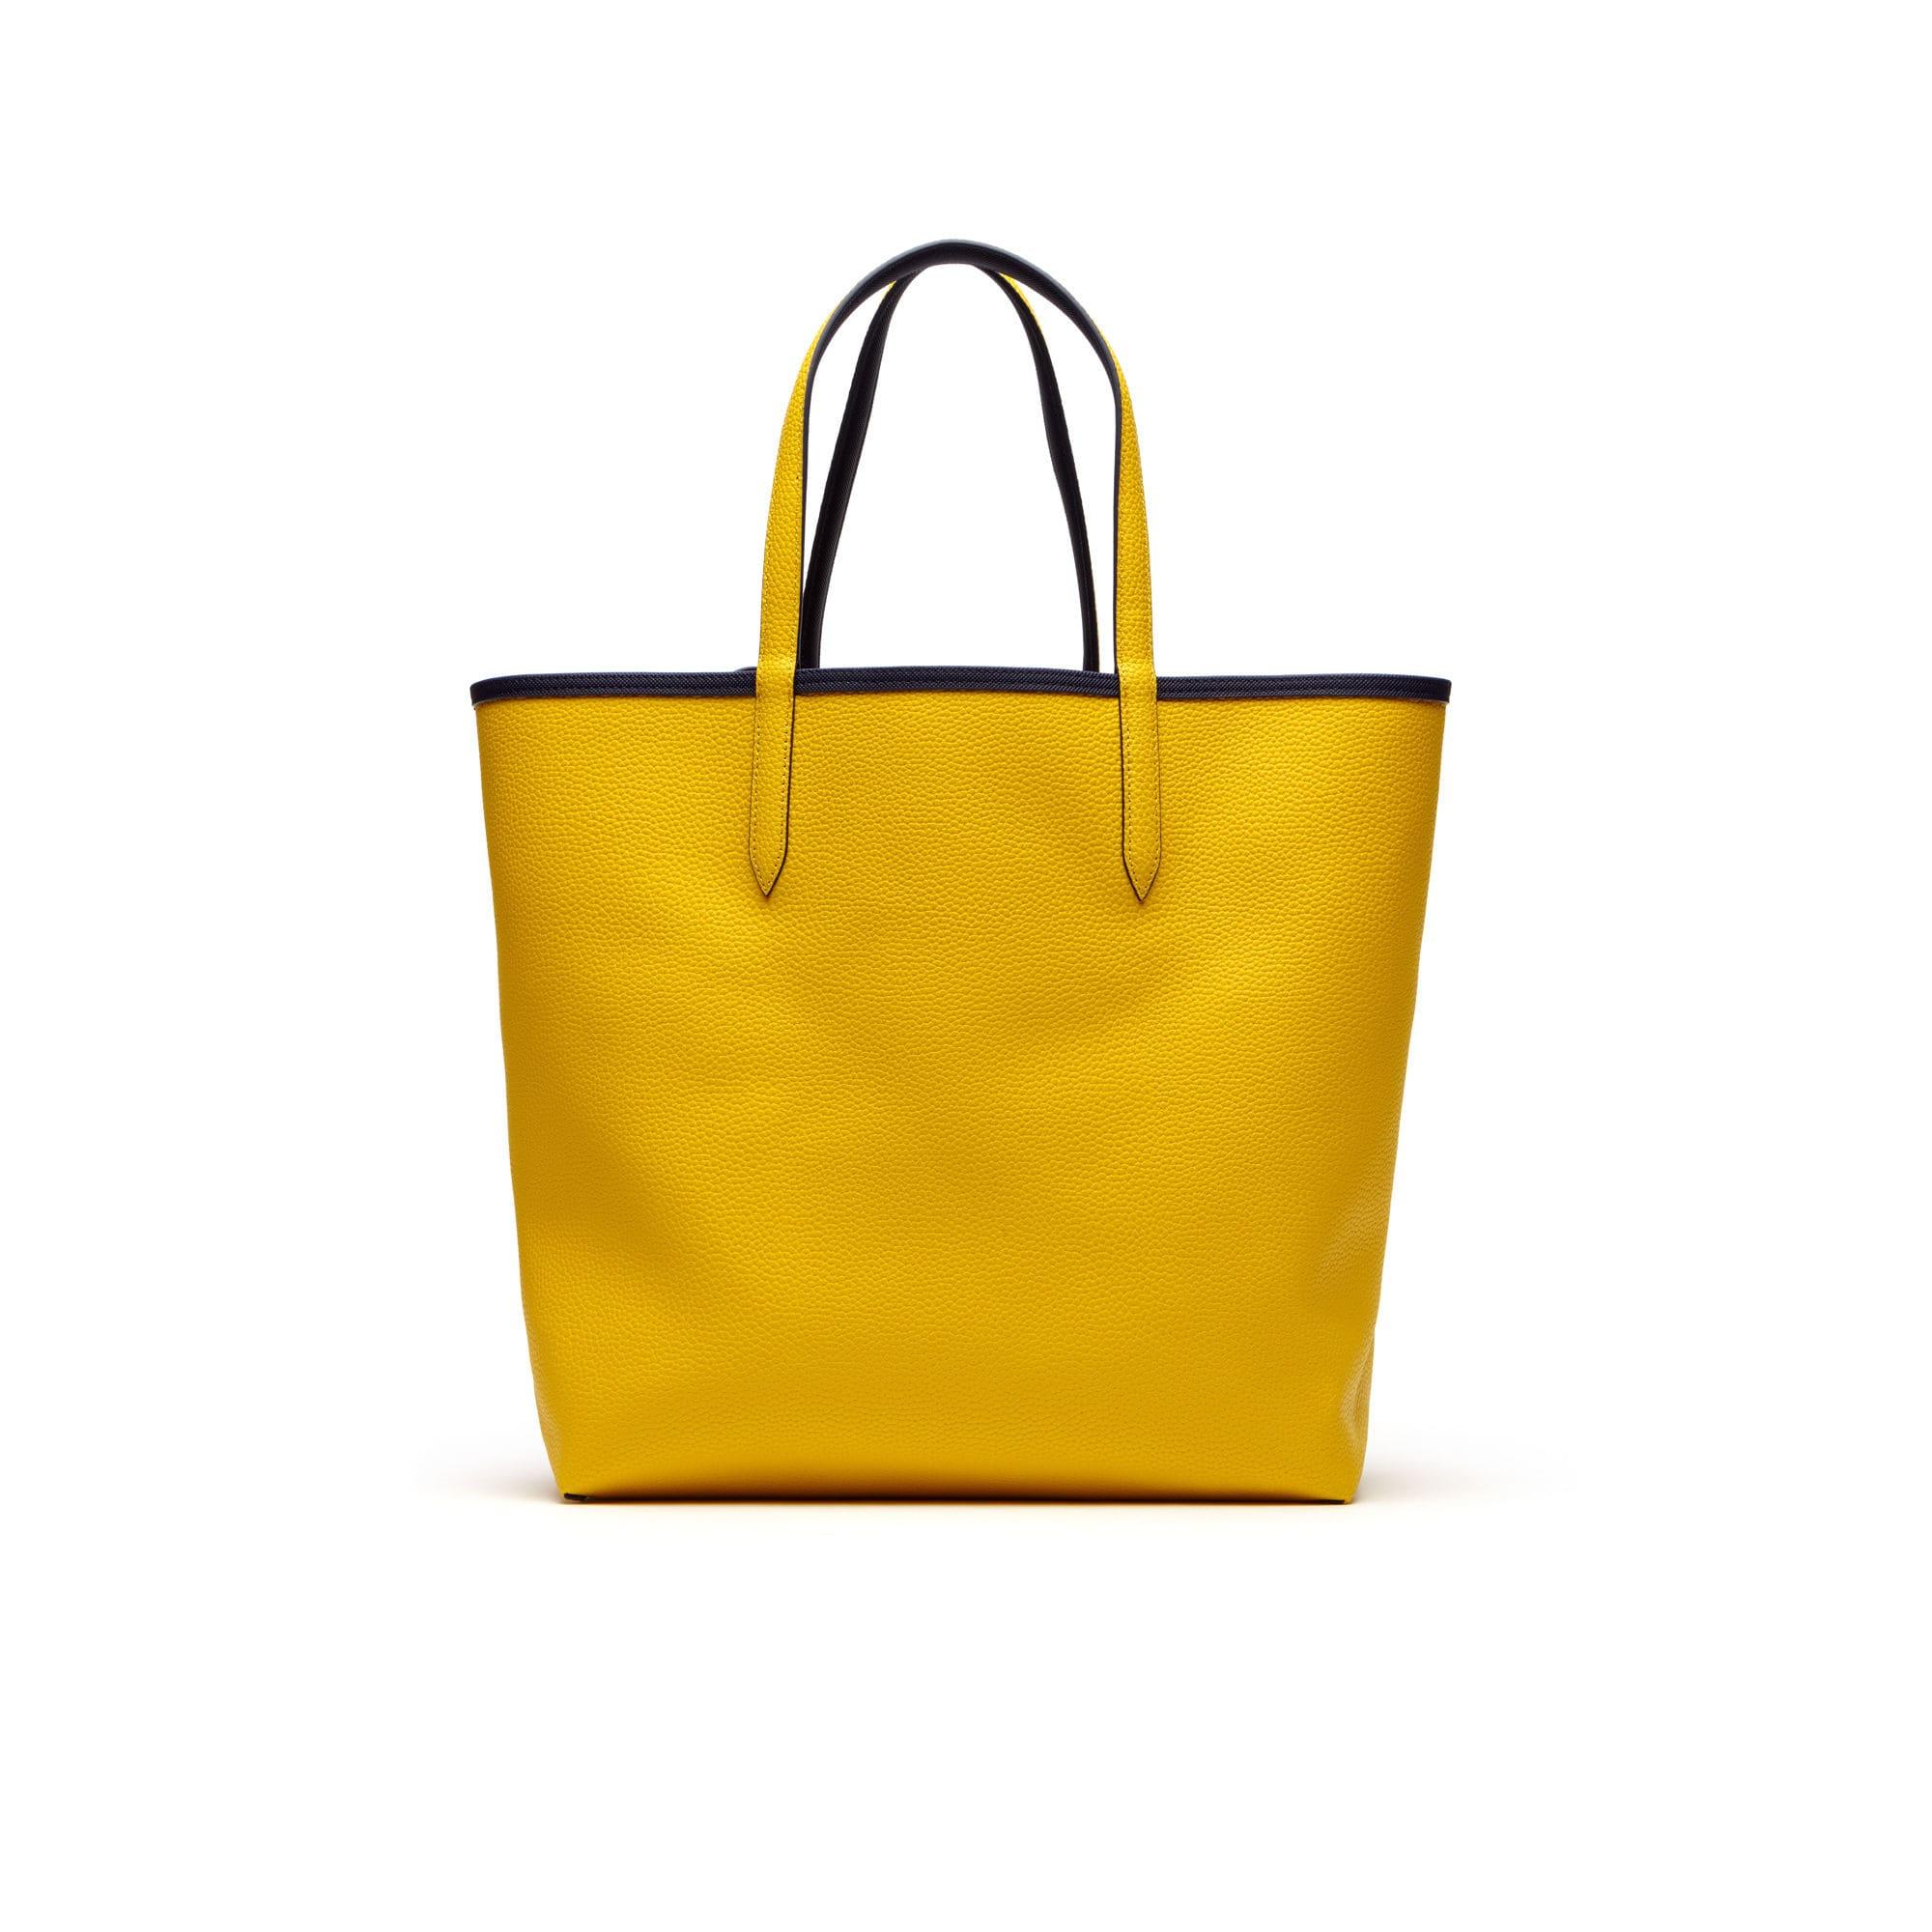 Lacoste Canvas Anna Large Reversible Tote Bag in Yellow - Lyst